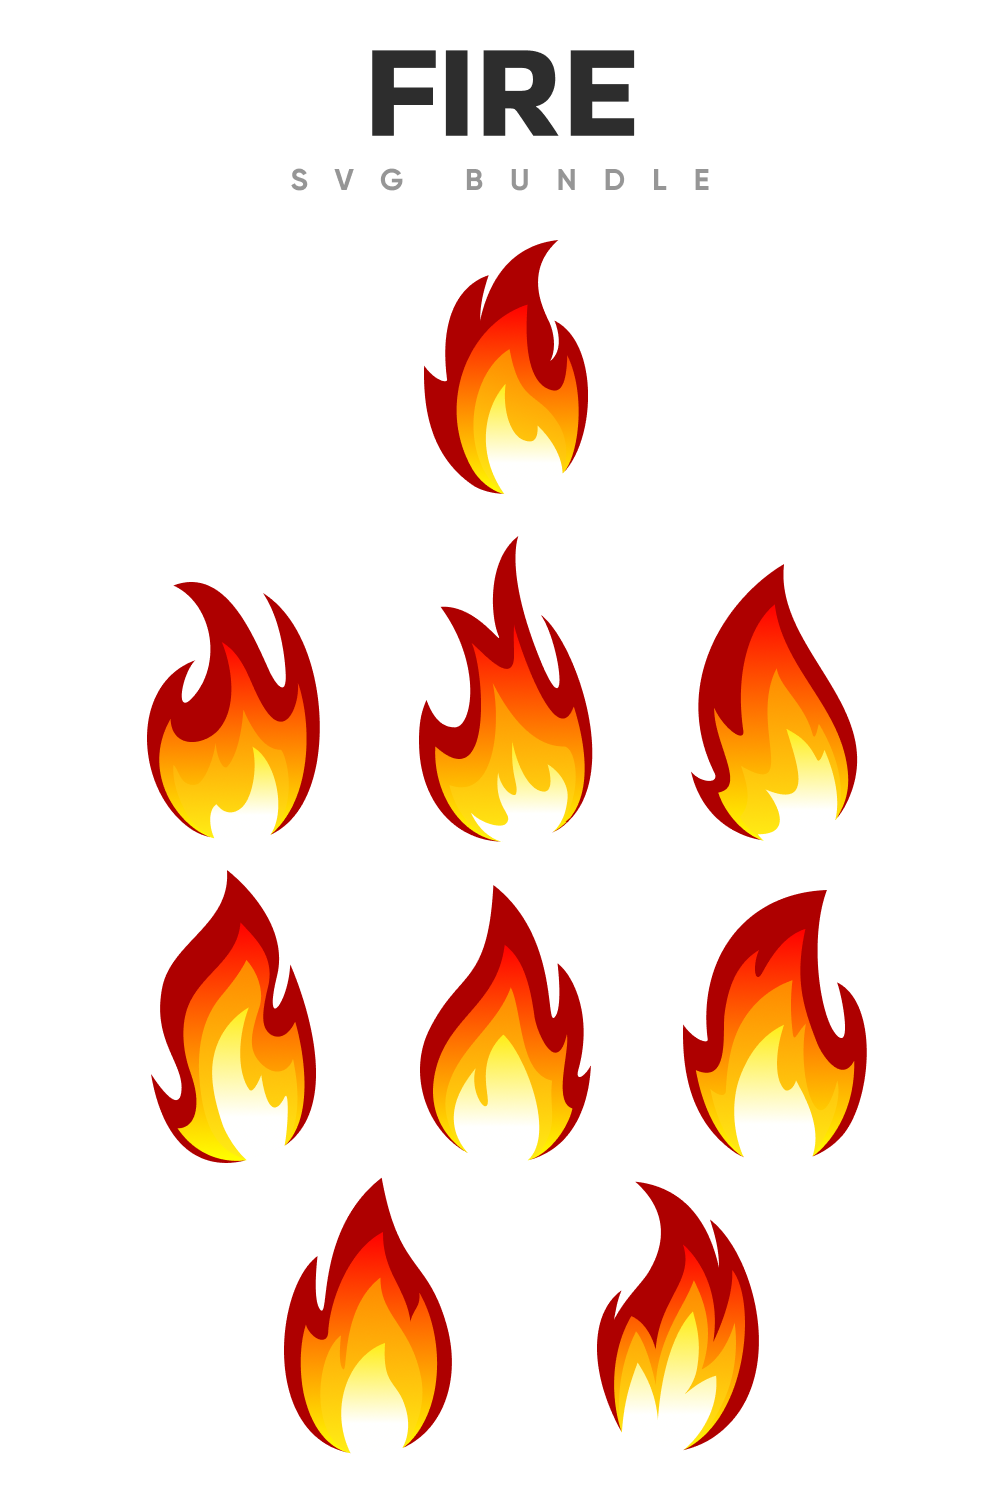 Some shapes of fire.